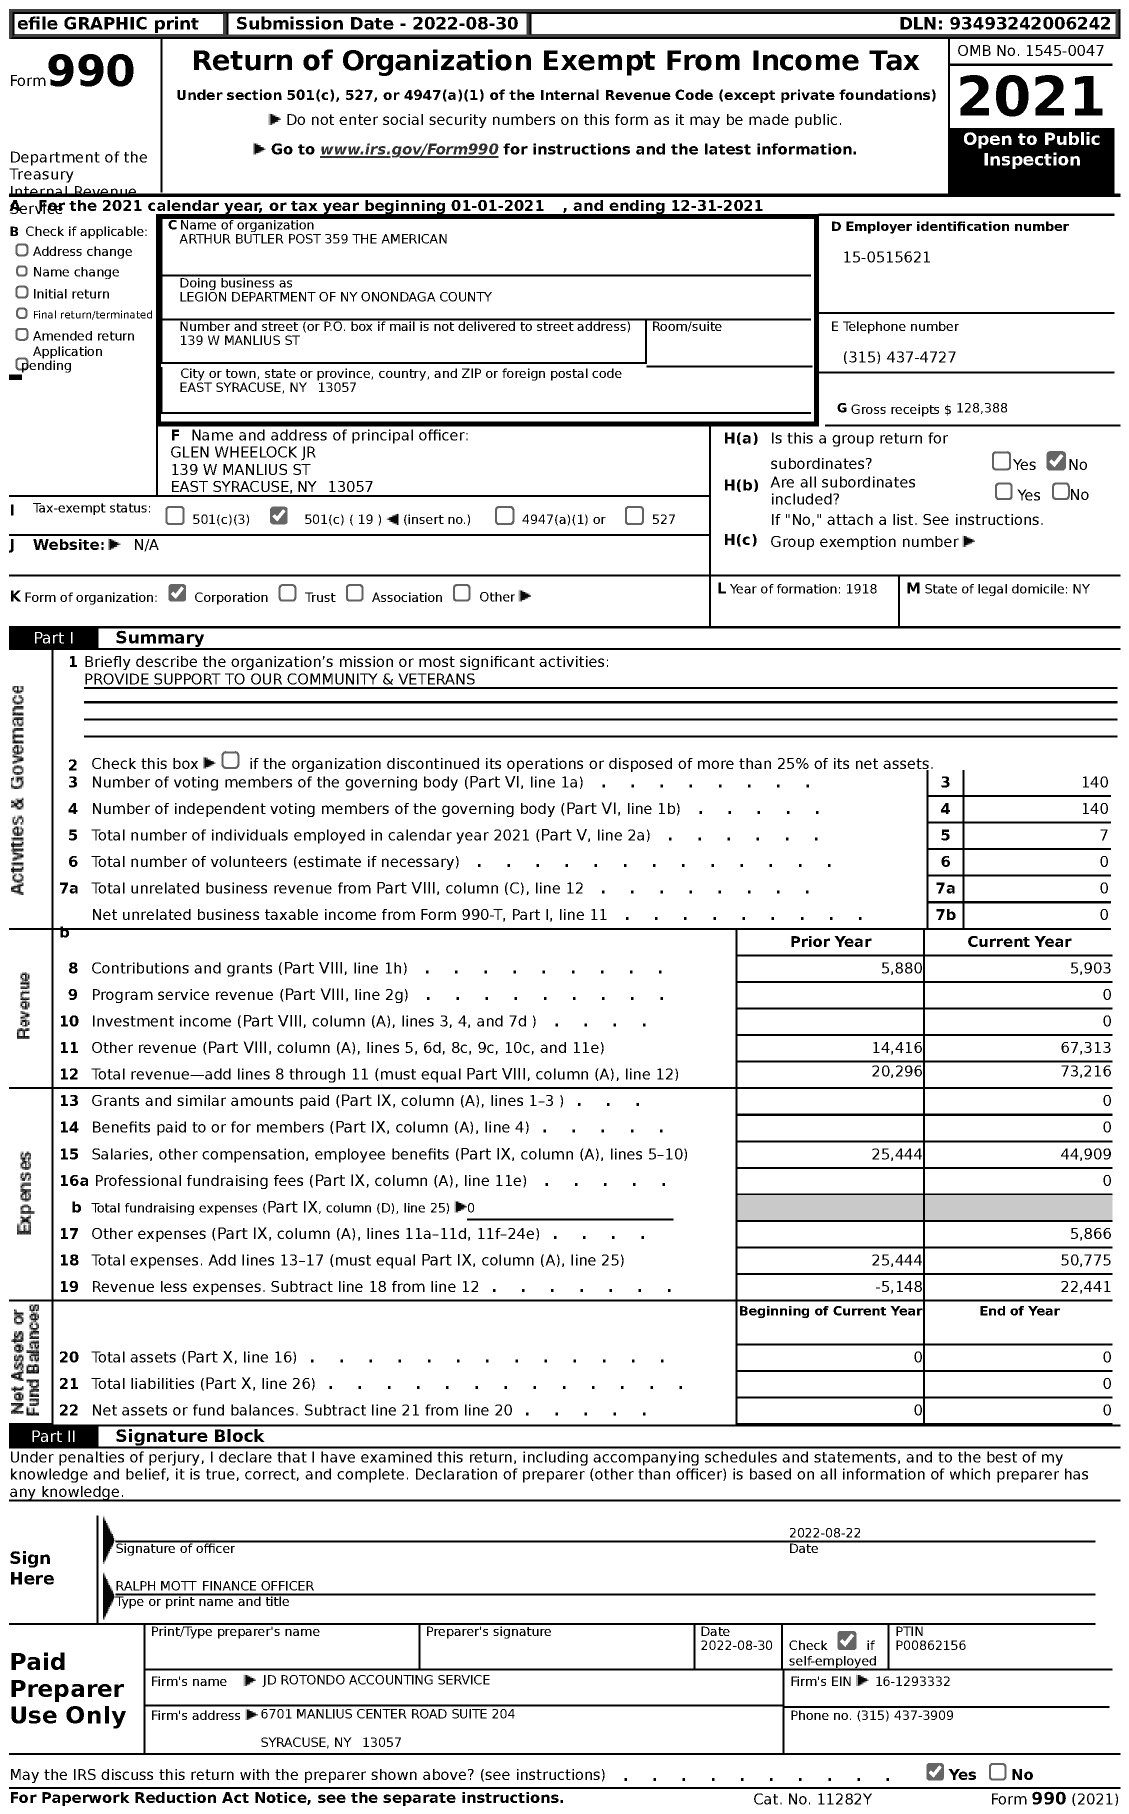 Image of first page of 2021 Form 990 for Legion Department of Ny Onondaga County